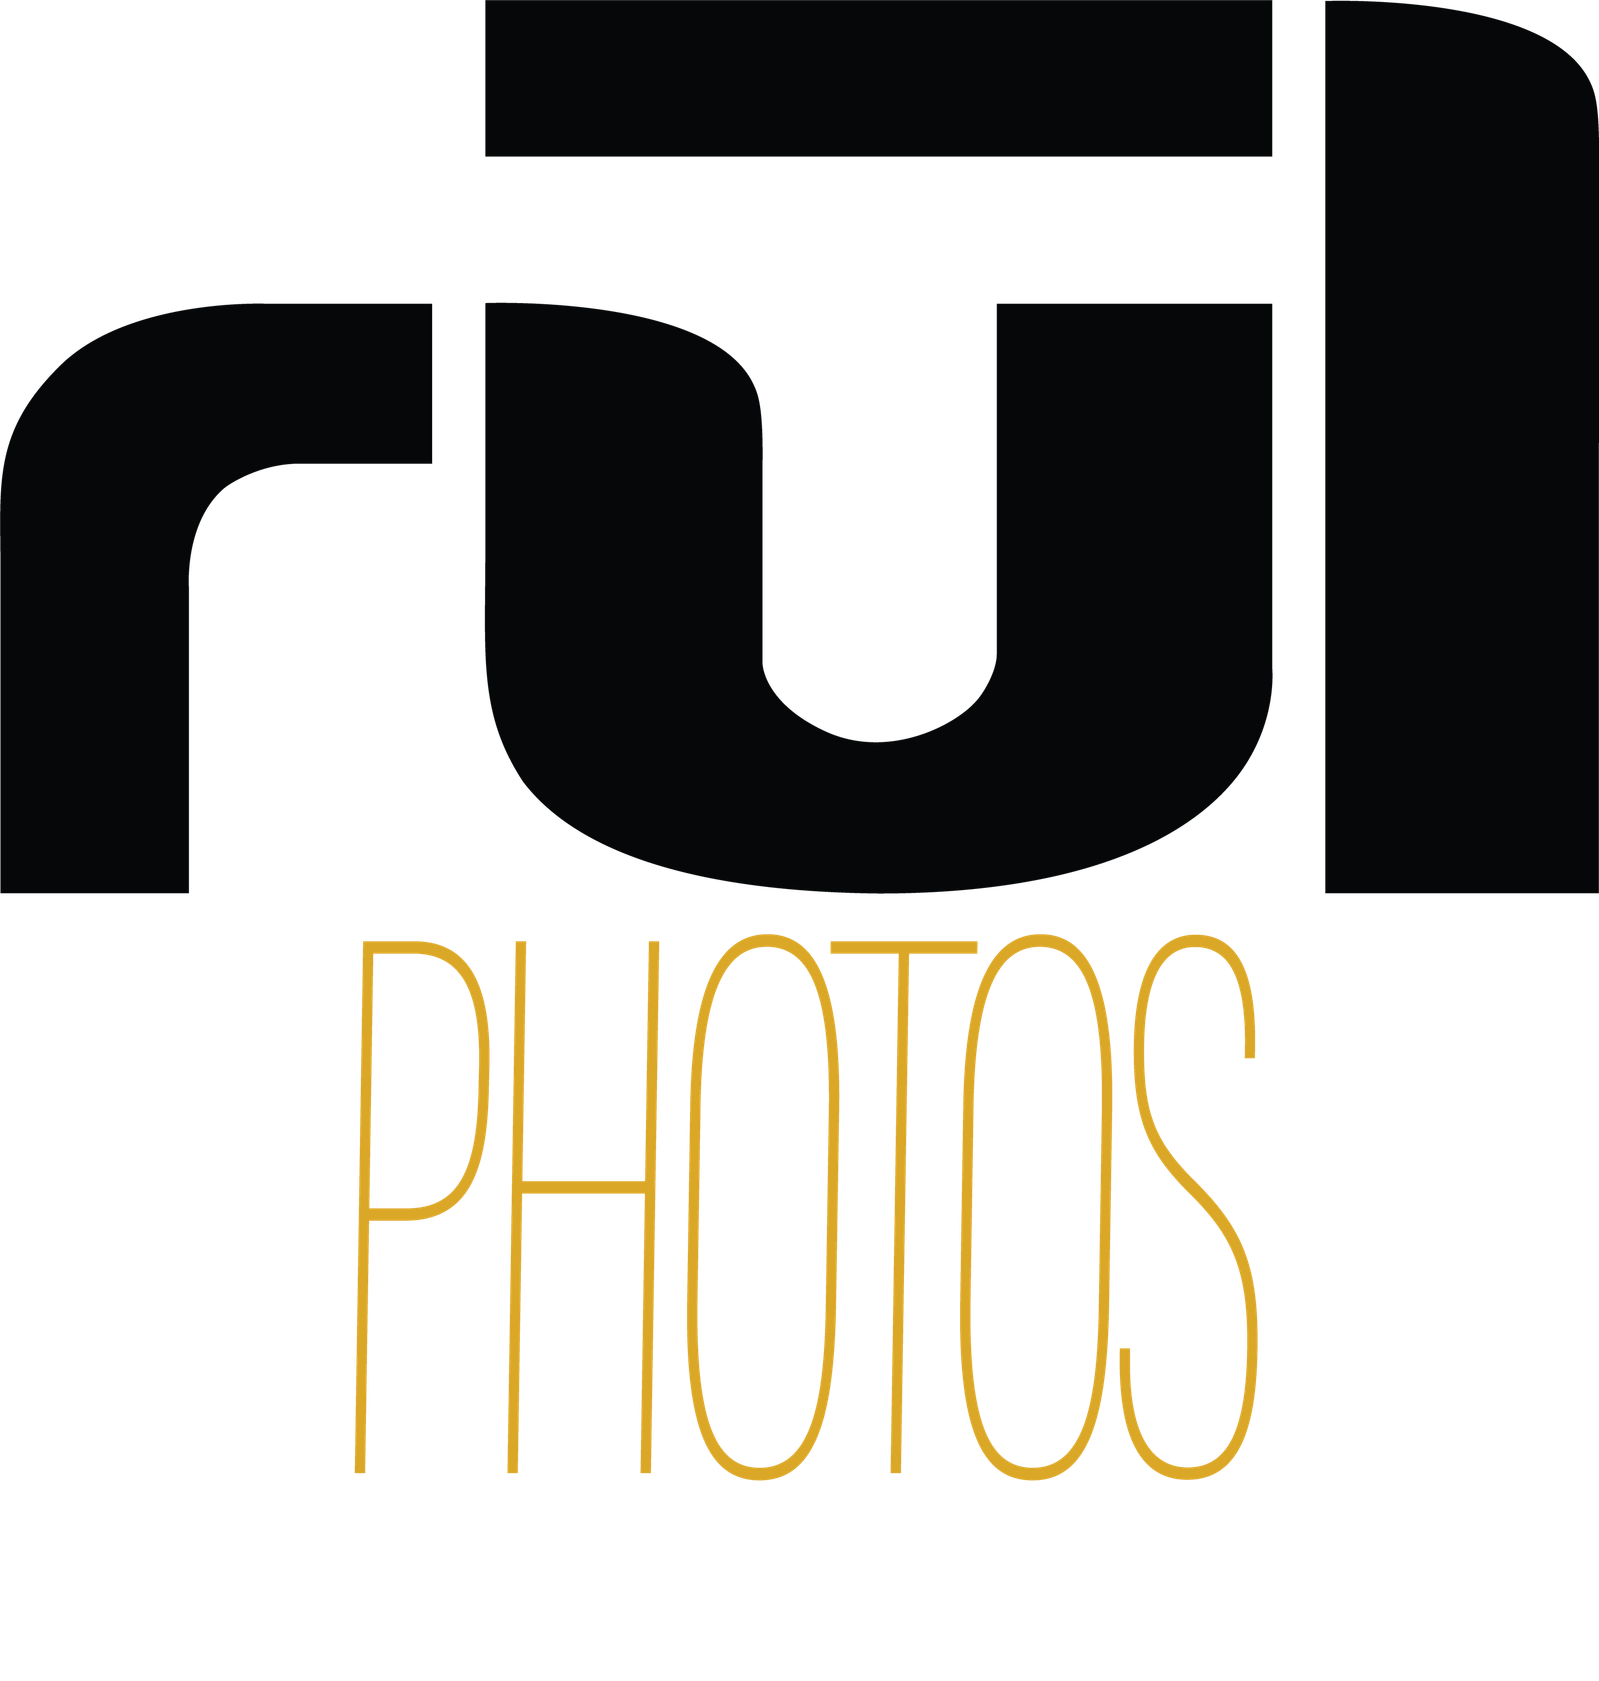 #rulphoto Affordable, professional photography, photographer, professional headshots, headshot photo, portrait studio, headshot photography, portraits photography, portraits near me, photography service,
family portrait, portrait photography, 